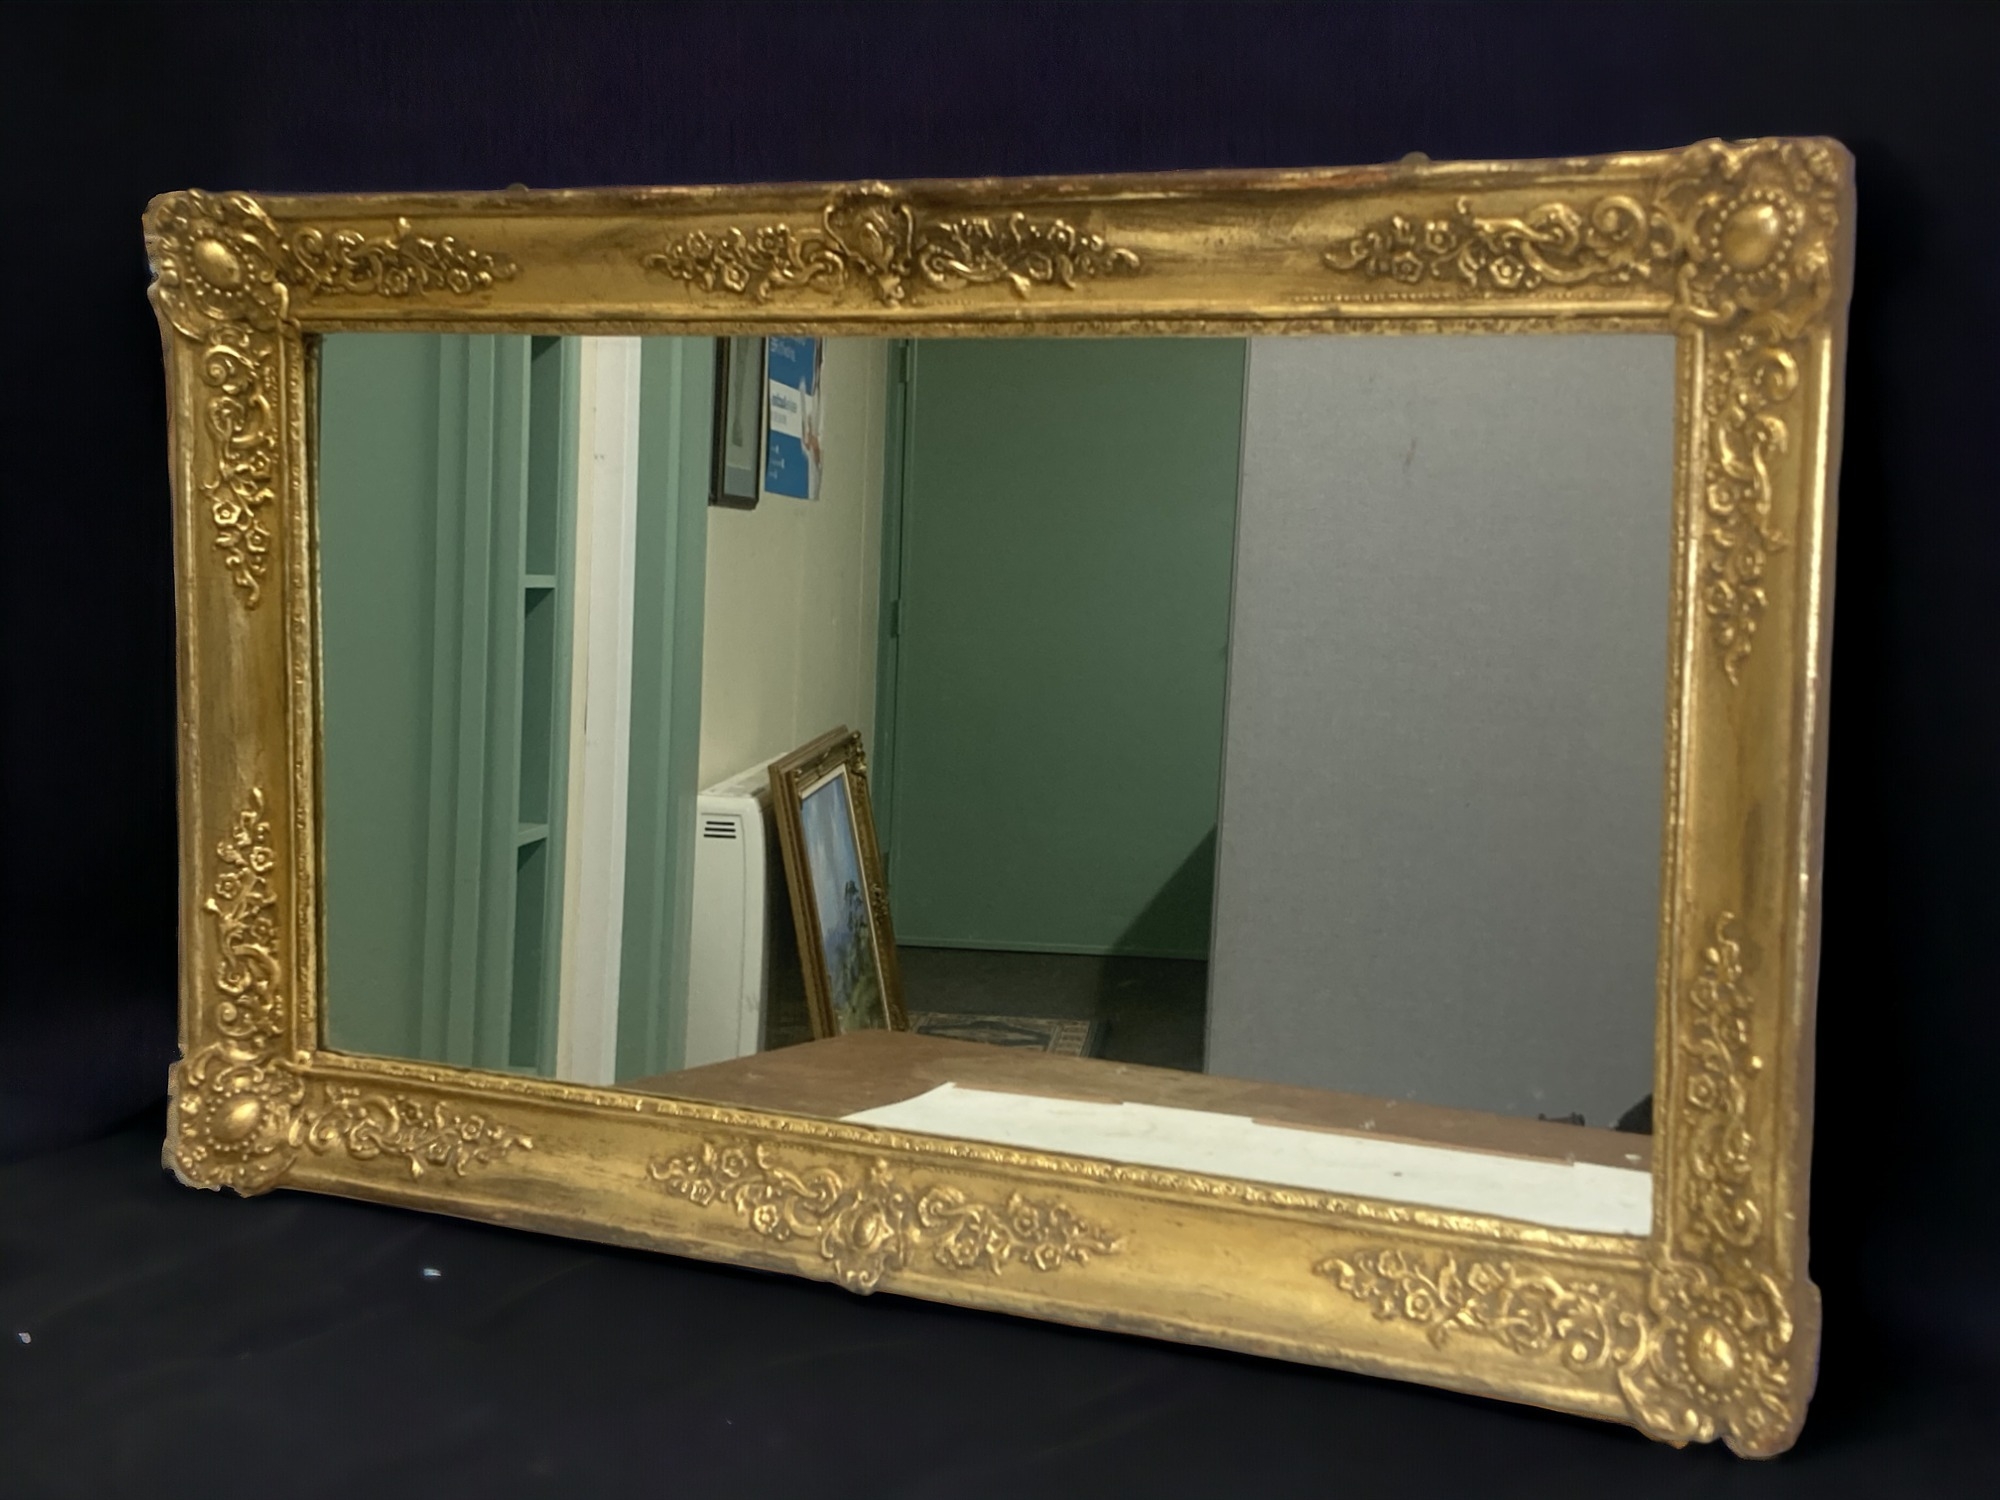 A 19TH CENTURY GILTWOOD MIRROR. 107 X 64 CM MIRROR AS BEEN REPLACED. - Image 4 of 4